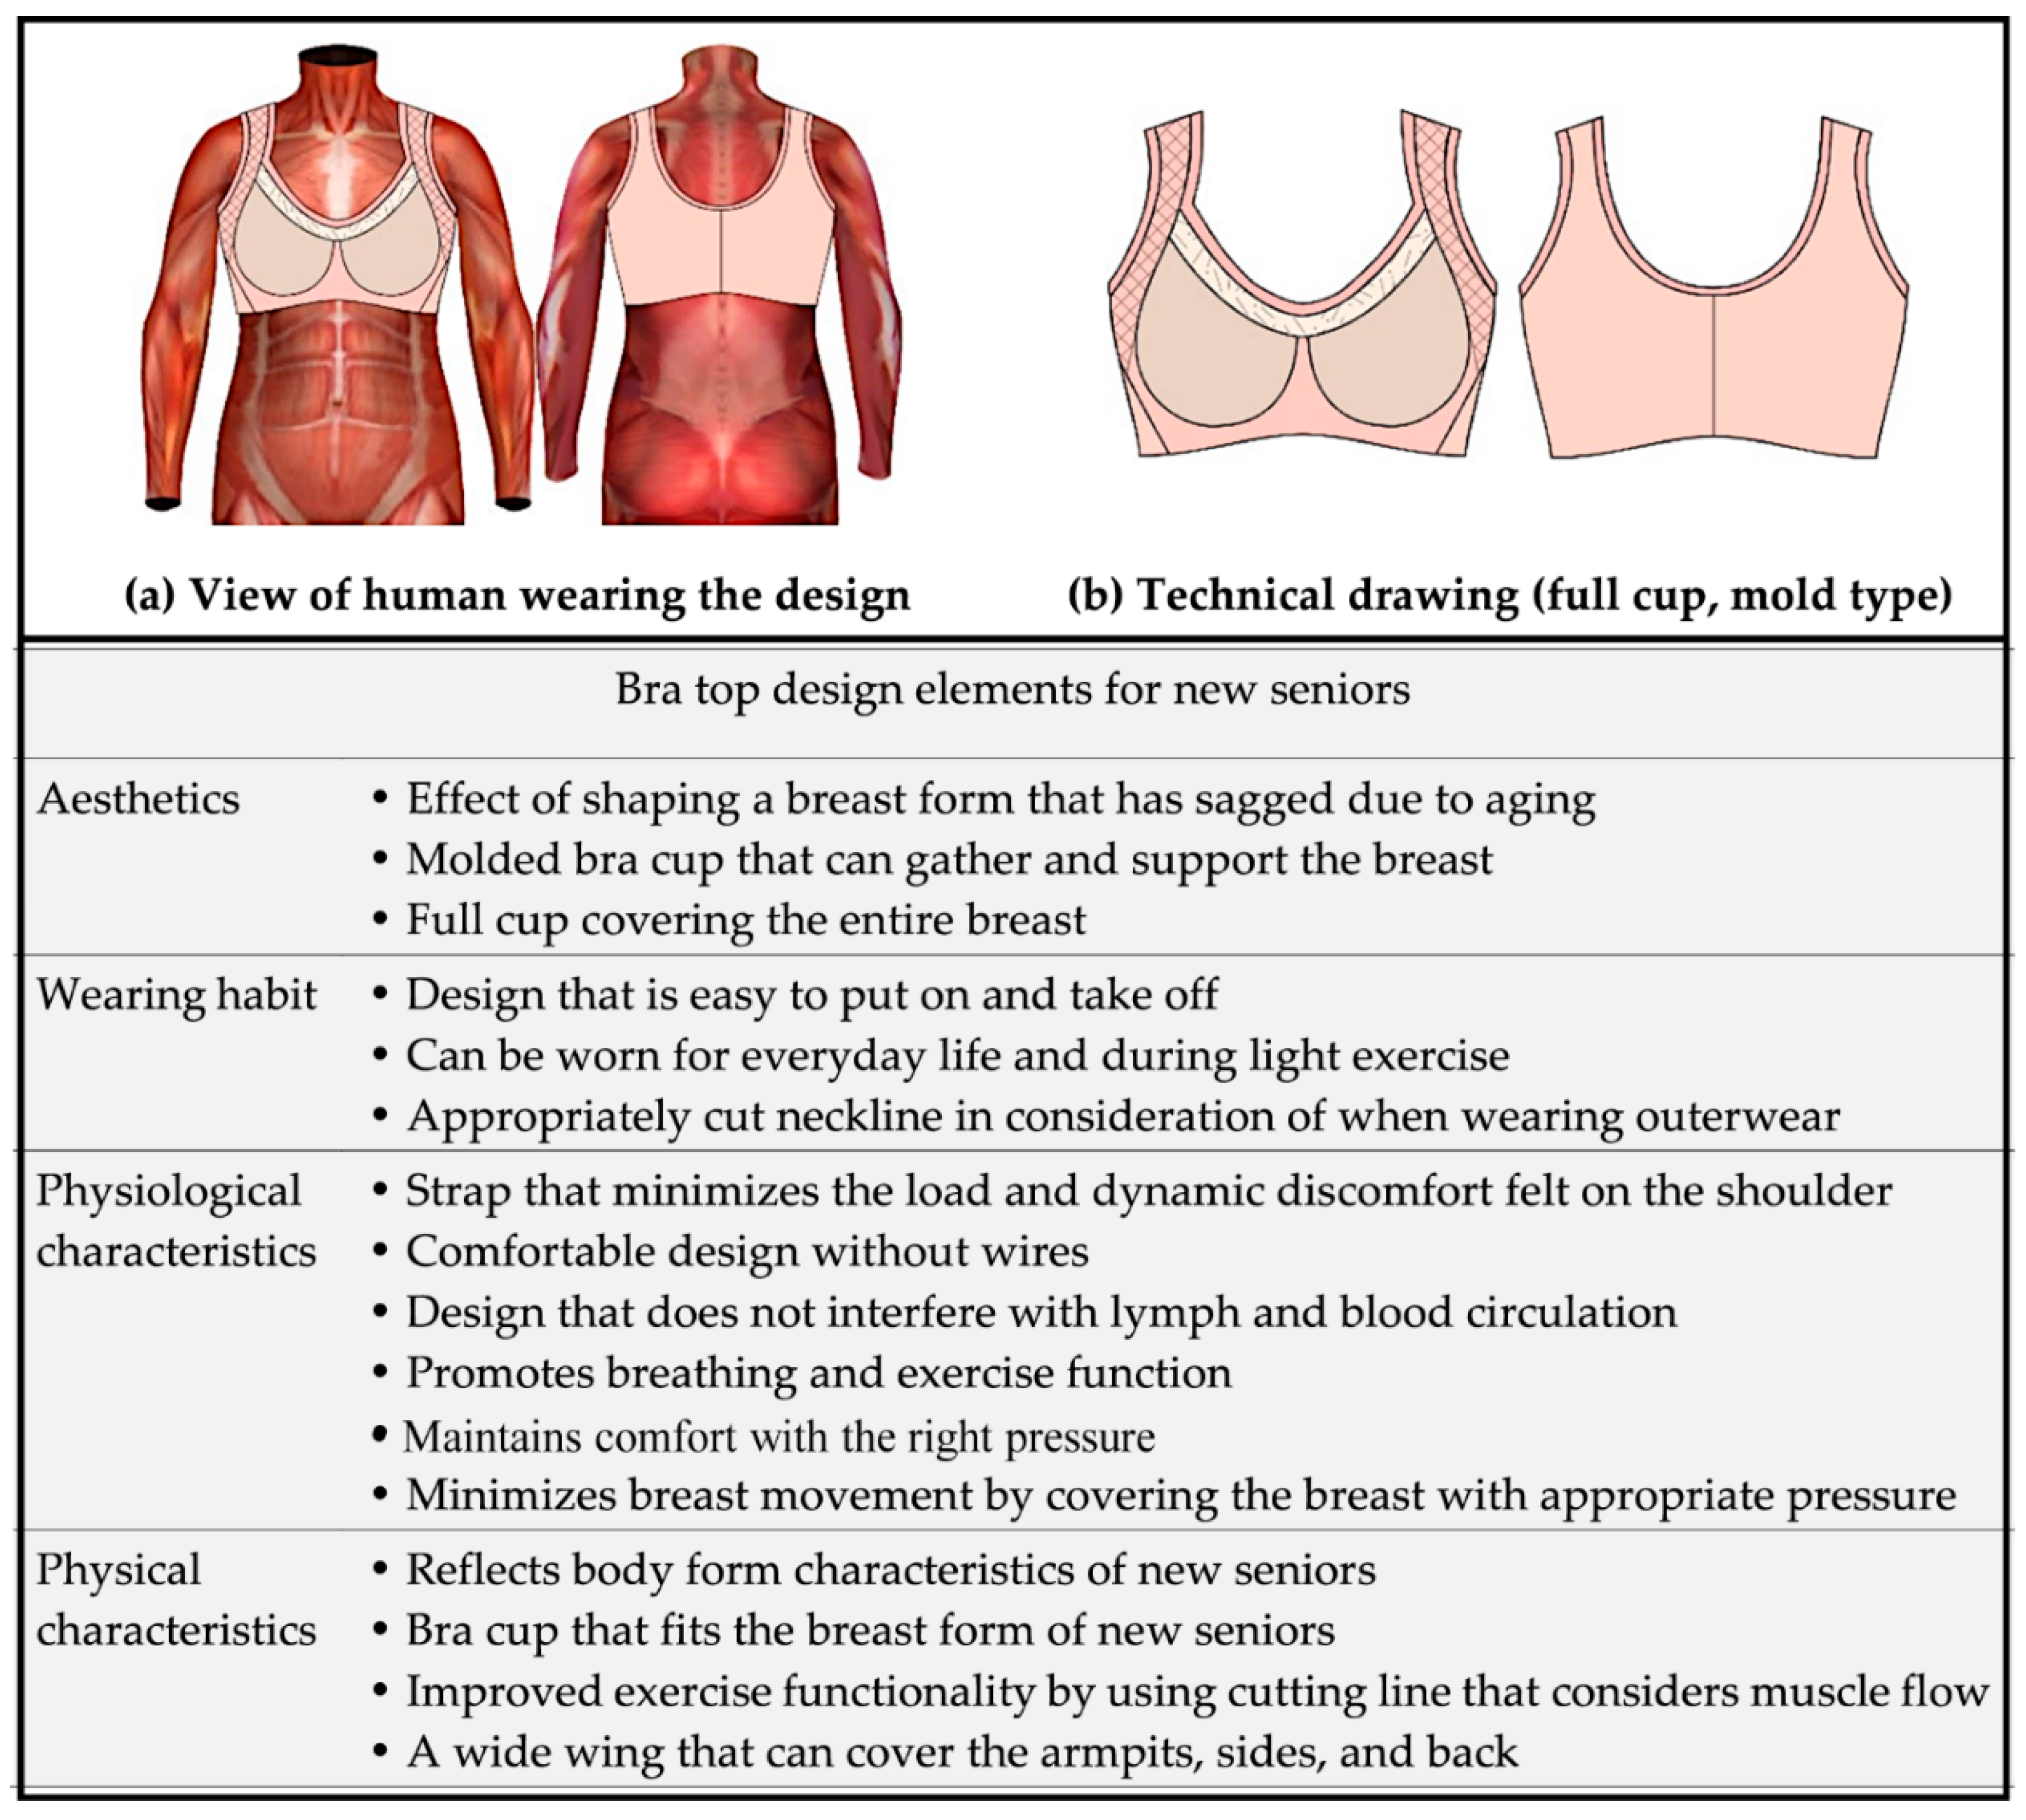 The proposed differences between a fashion industry standard bra